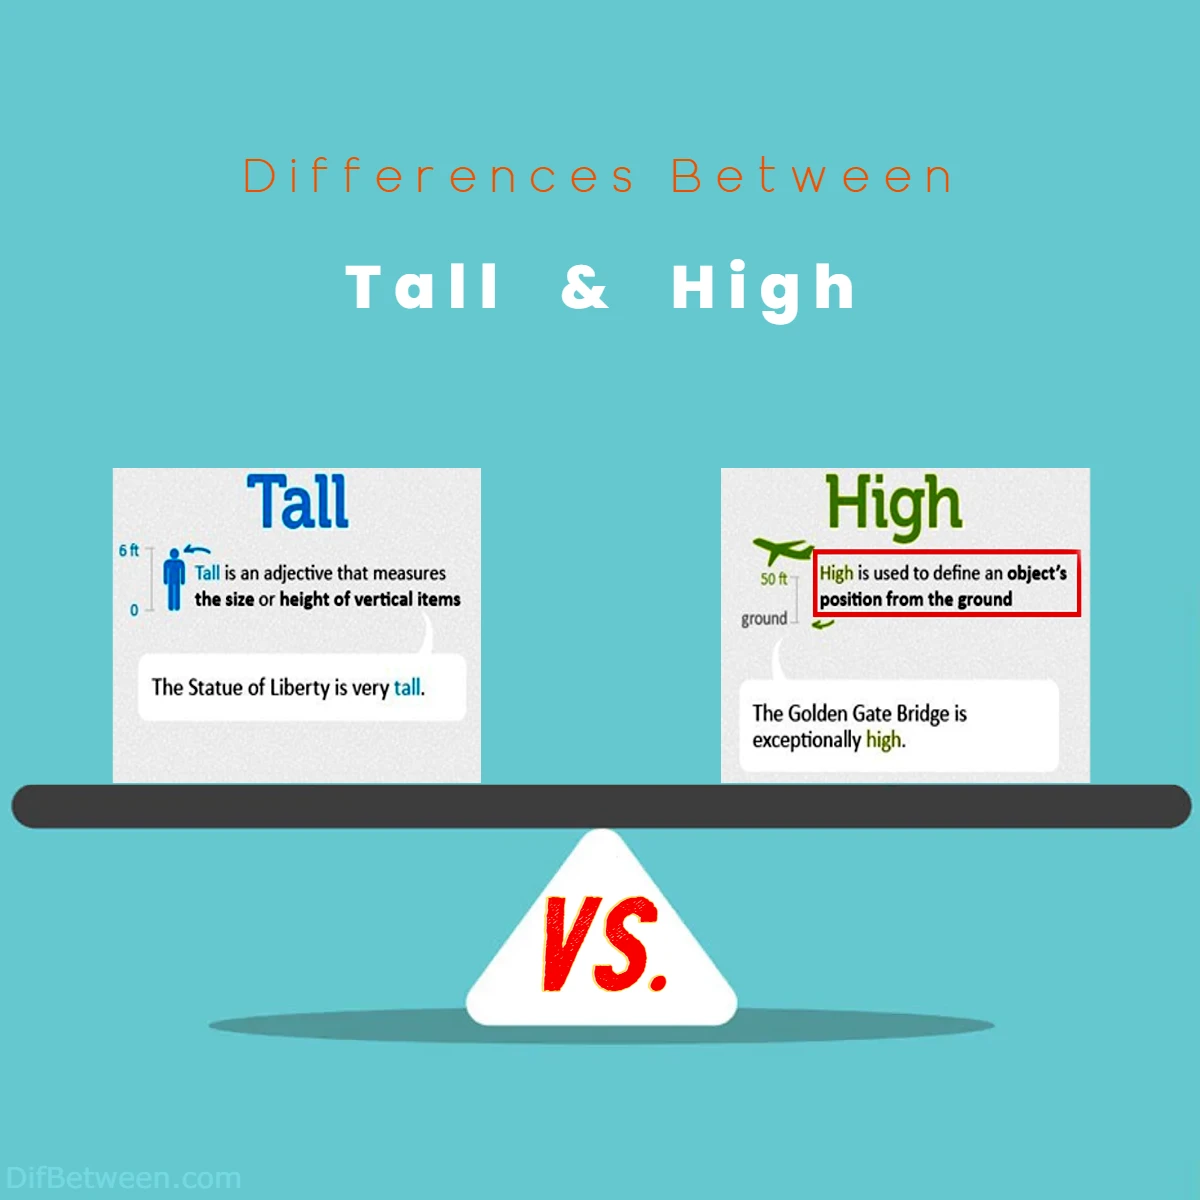 Differences Between Tall vs High